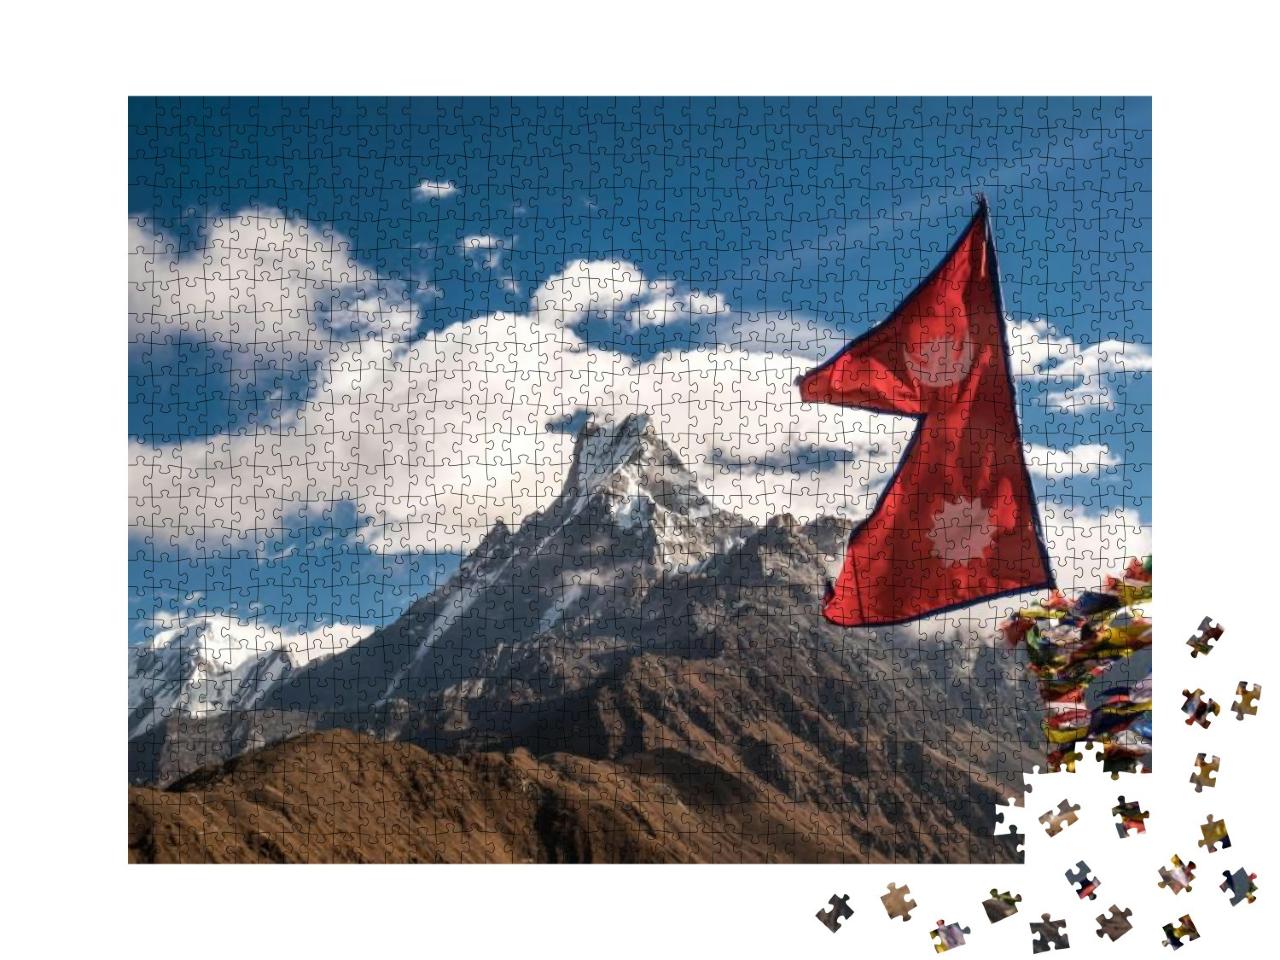 Himalayan Mountain Machapuchare... Jigsaw Puzzle with 1000 pieces